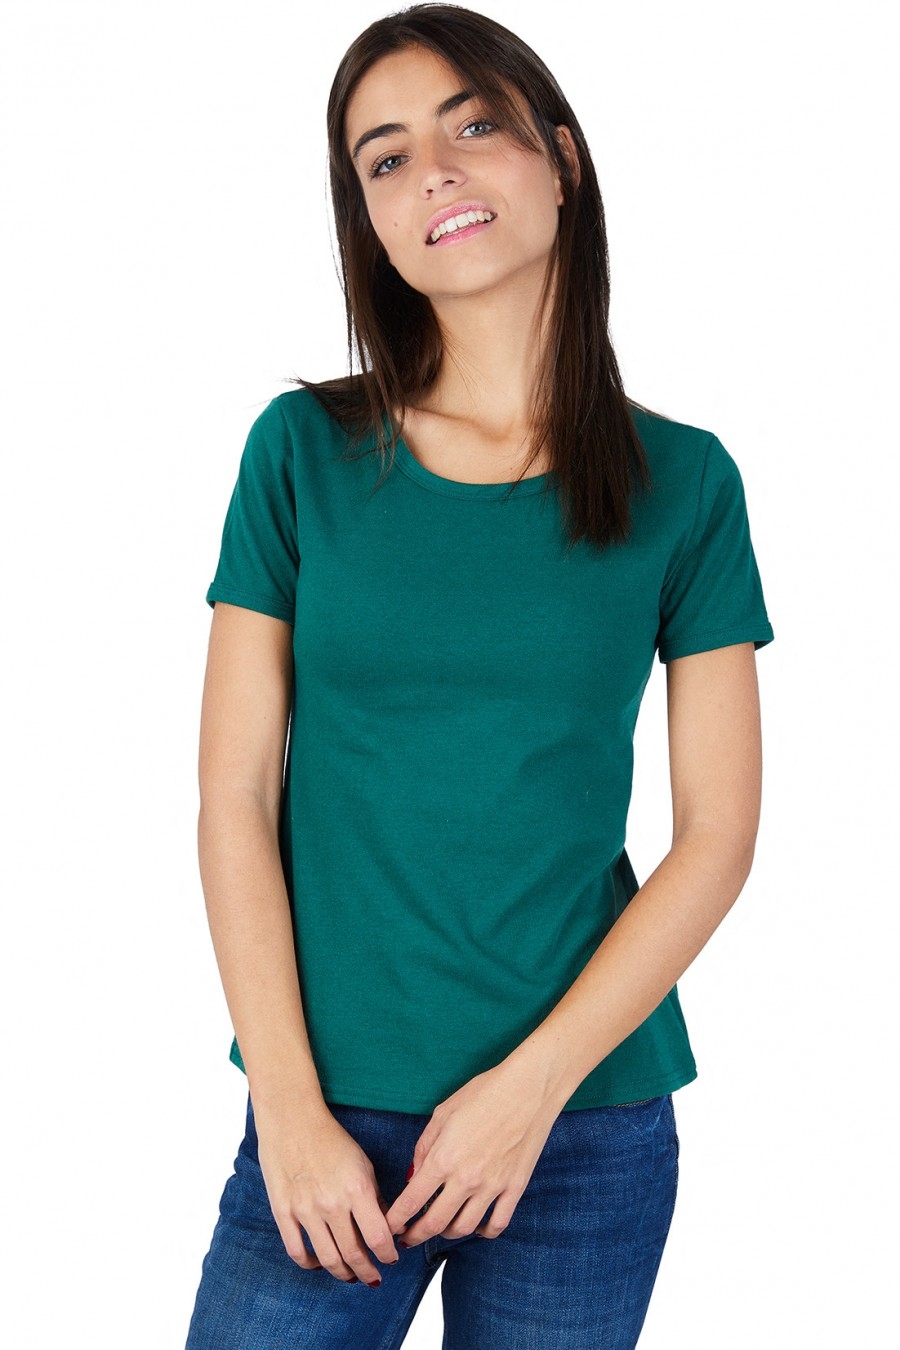 T-SHIRT FEMME MANCHE COURTE COL ROND VERT BOUTEILLE - Made in France & 100% Recyclé